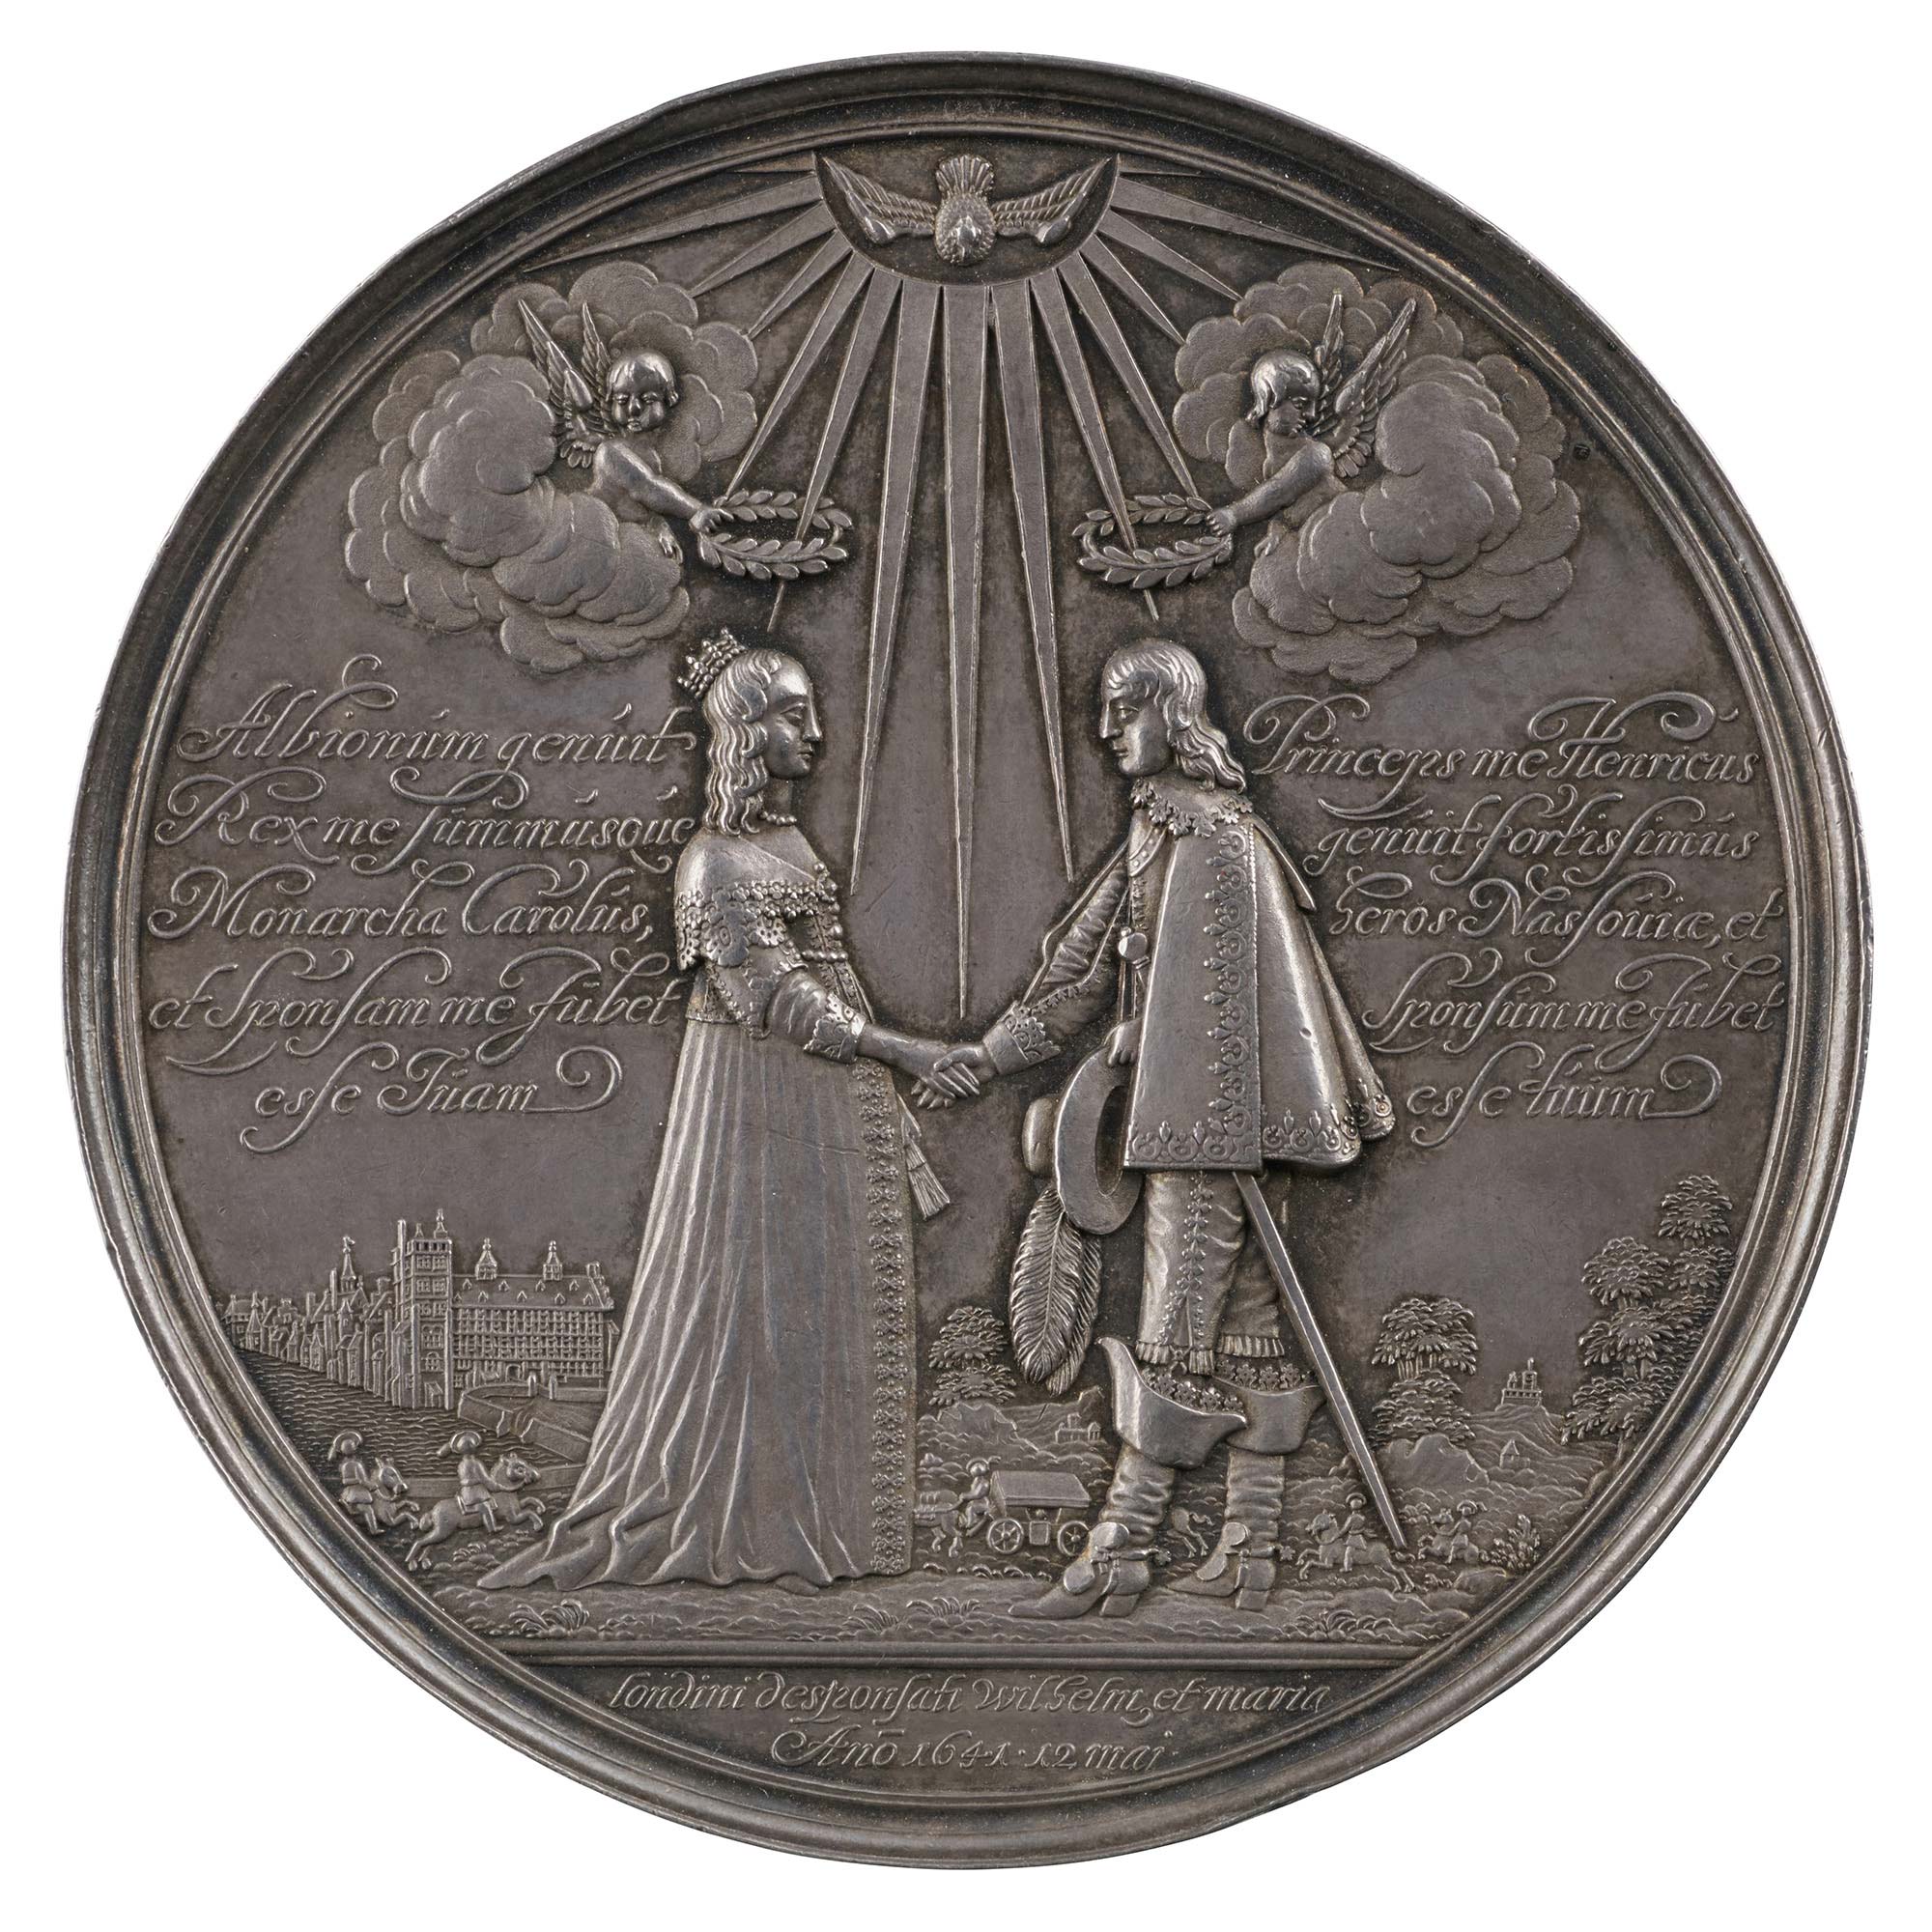 Silver medal of a man and woman joining hands and receiving laurel wreaths from angels